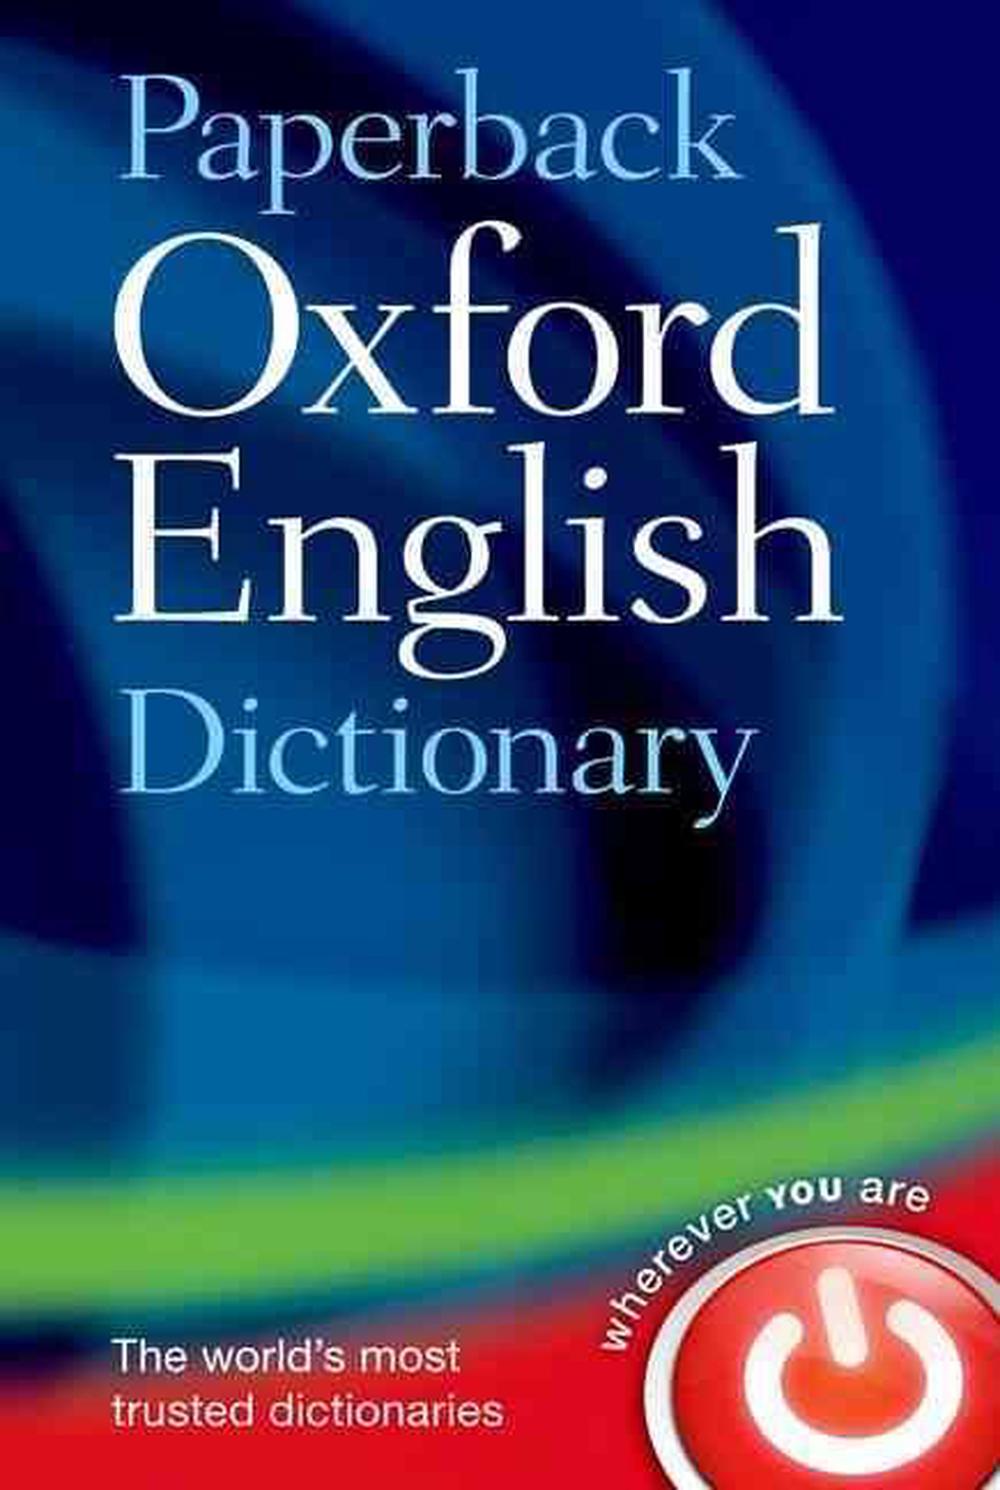 by　Buy　online　Paperback,　English　Dictionary　Paperback　at　Dictionaries,　9780199640942　Oxford　Nile　Oxford　The